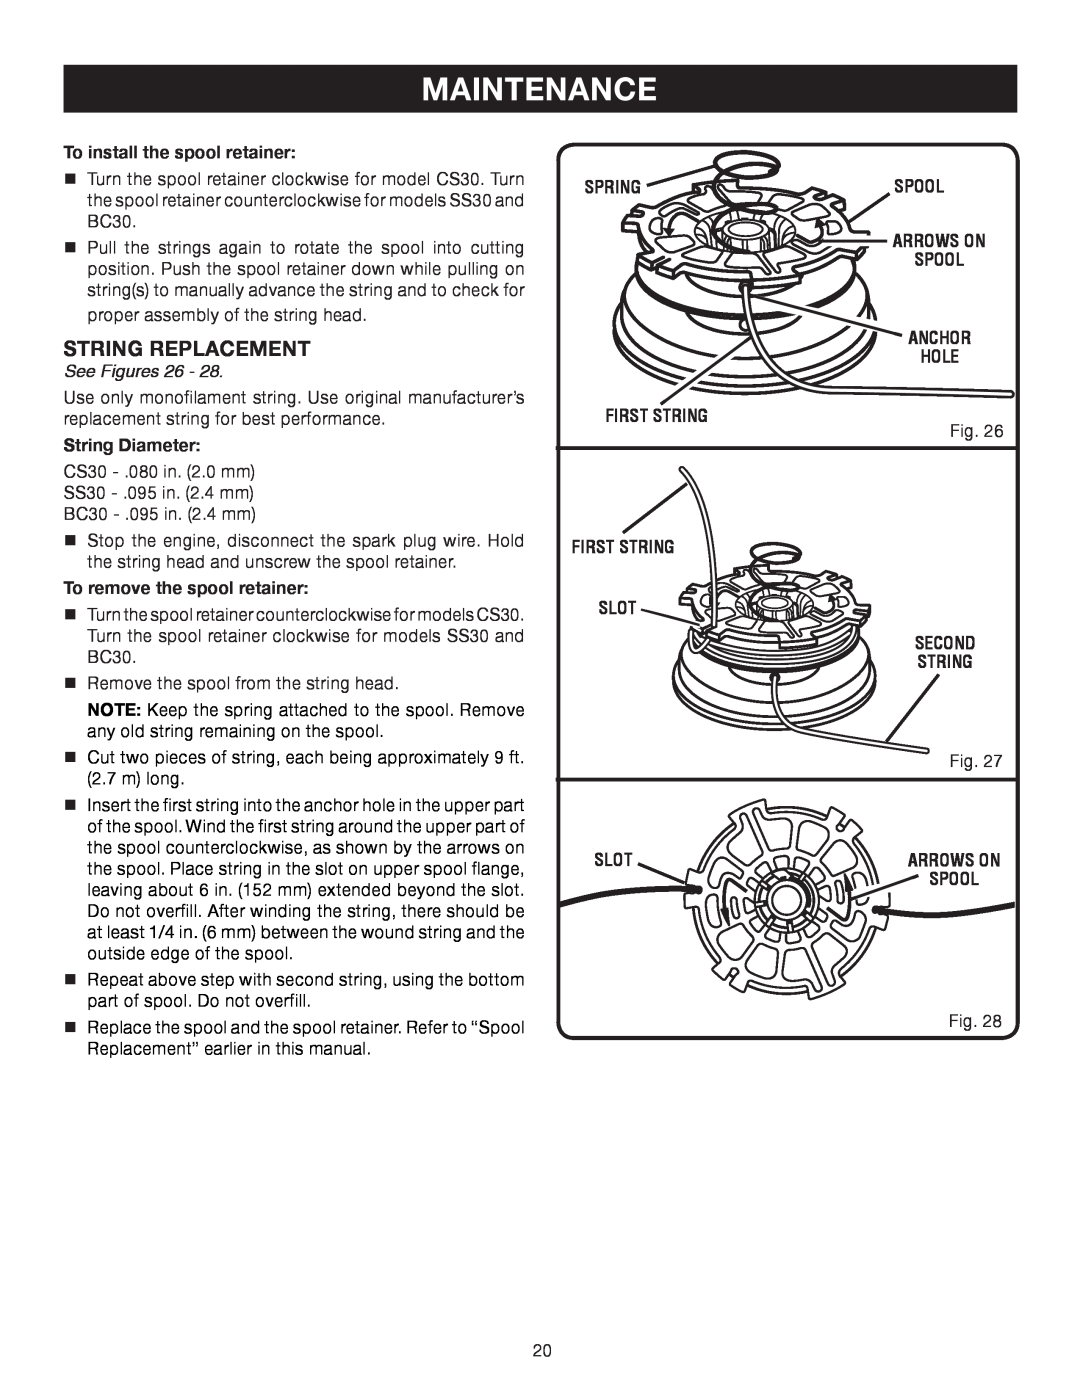 Ryobi SS30 RY30140 String Replacement, Maintenance, To install the spool retainer, See Figures 26, Spring, String Diameter 